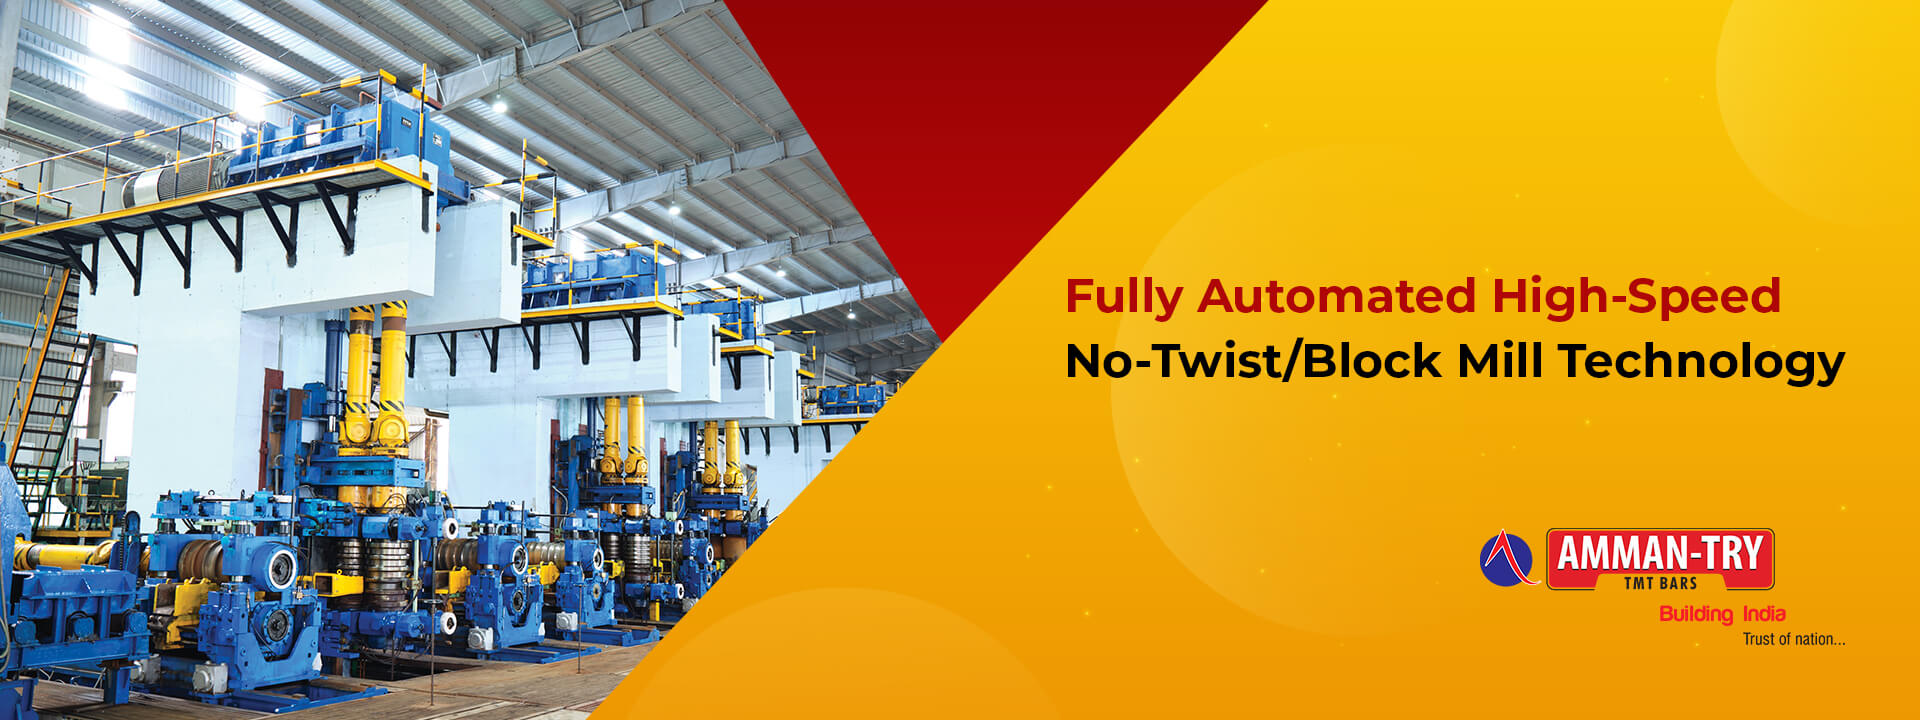 Fully Automated High-speed No-Twist Mill Technology